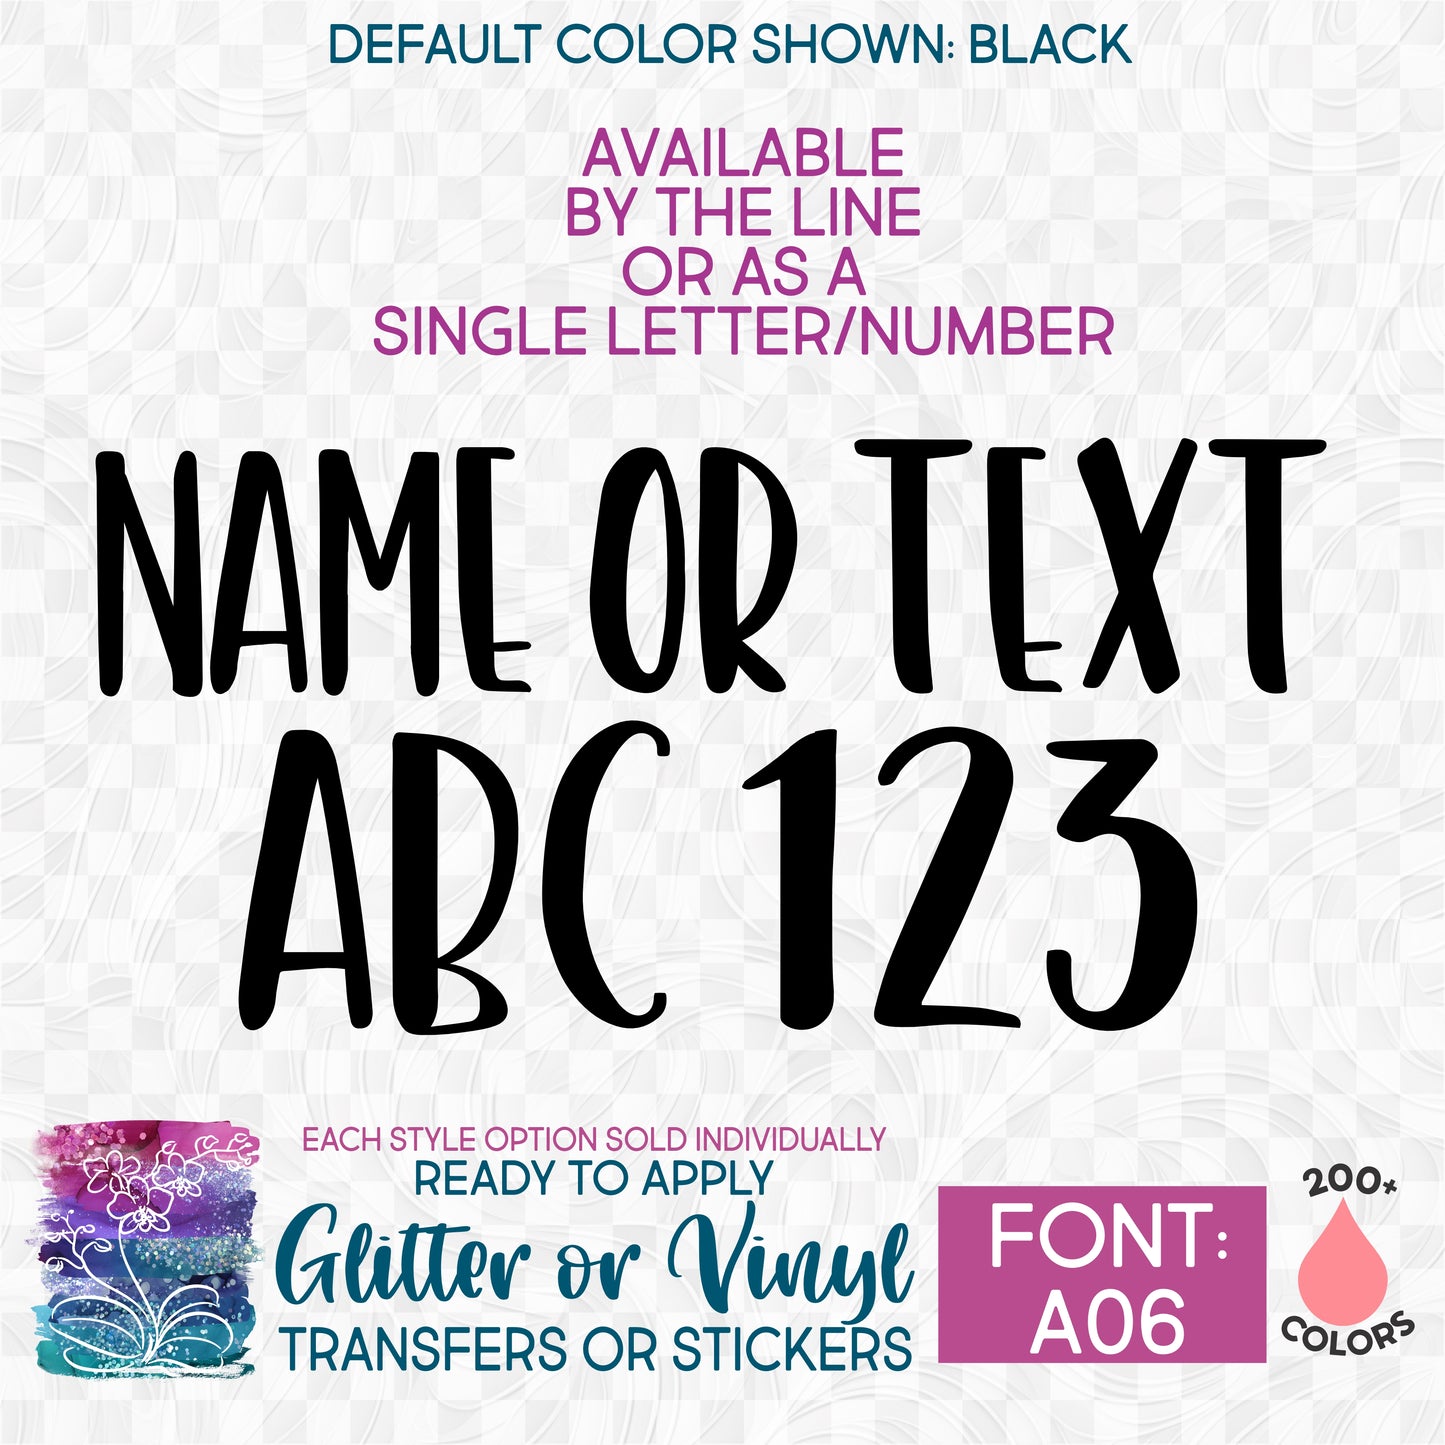 (s097-A06) Block Font Custom Name Text or Single Letter Number Glitter or Vinyl Iron-On Transfer or Sticker